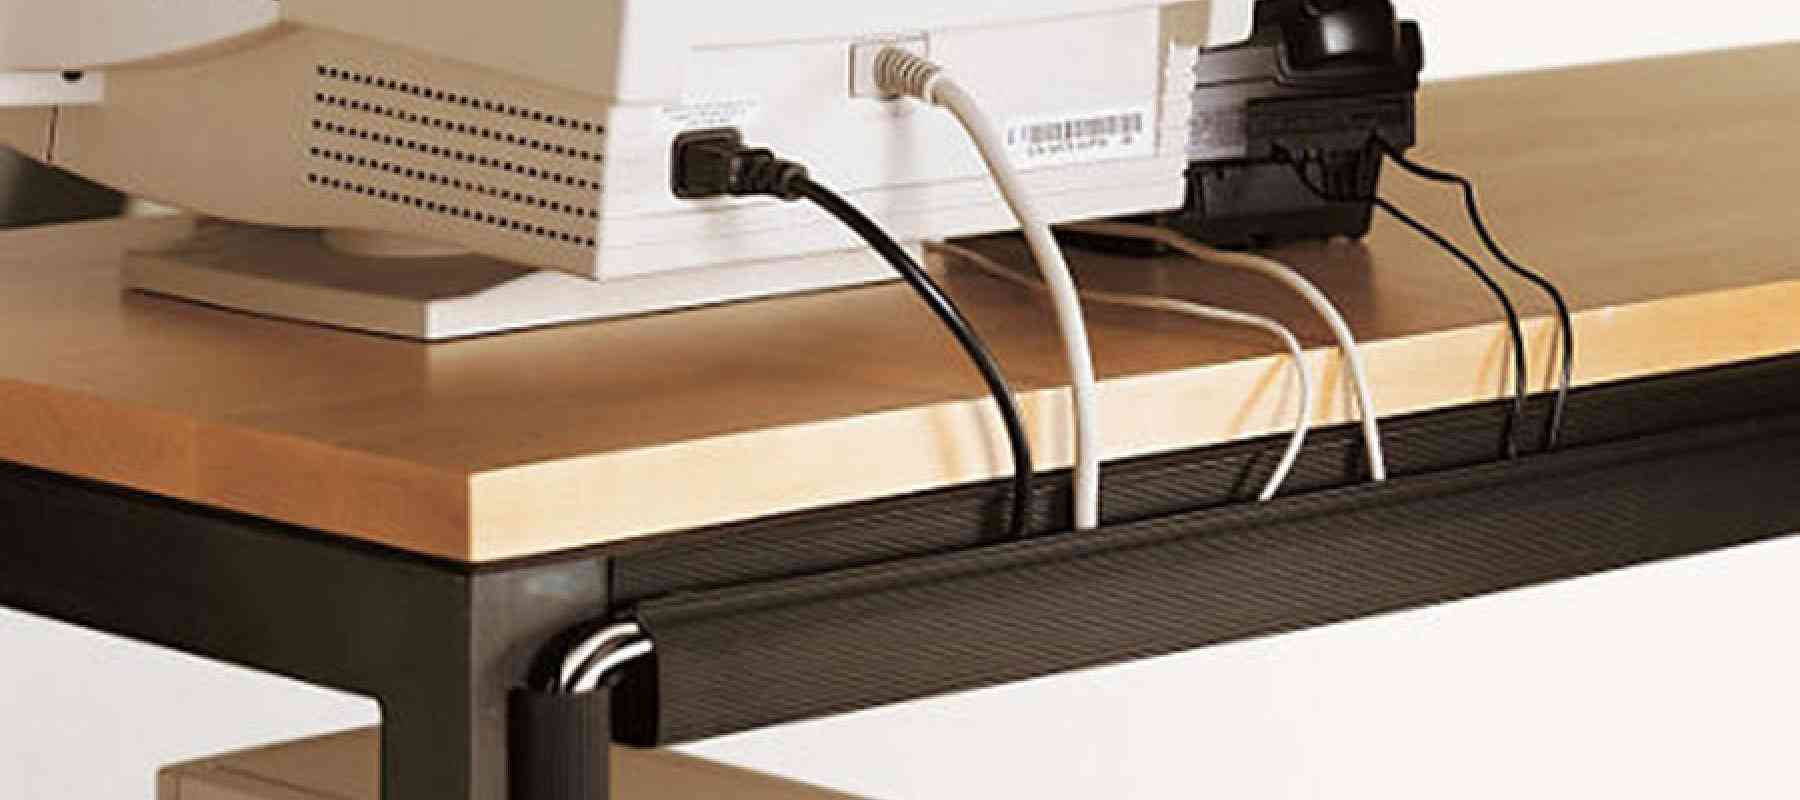 5 Tips to Hide Cord Clutter